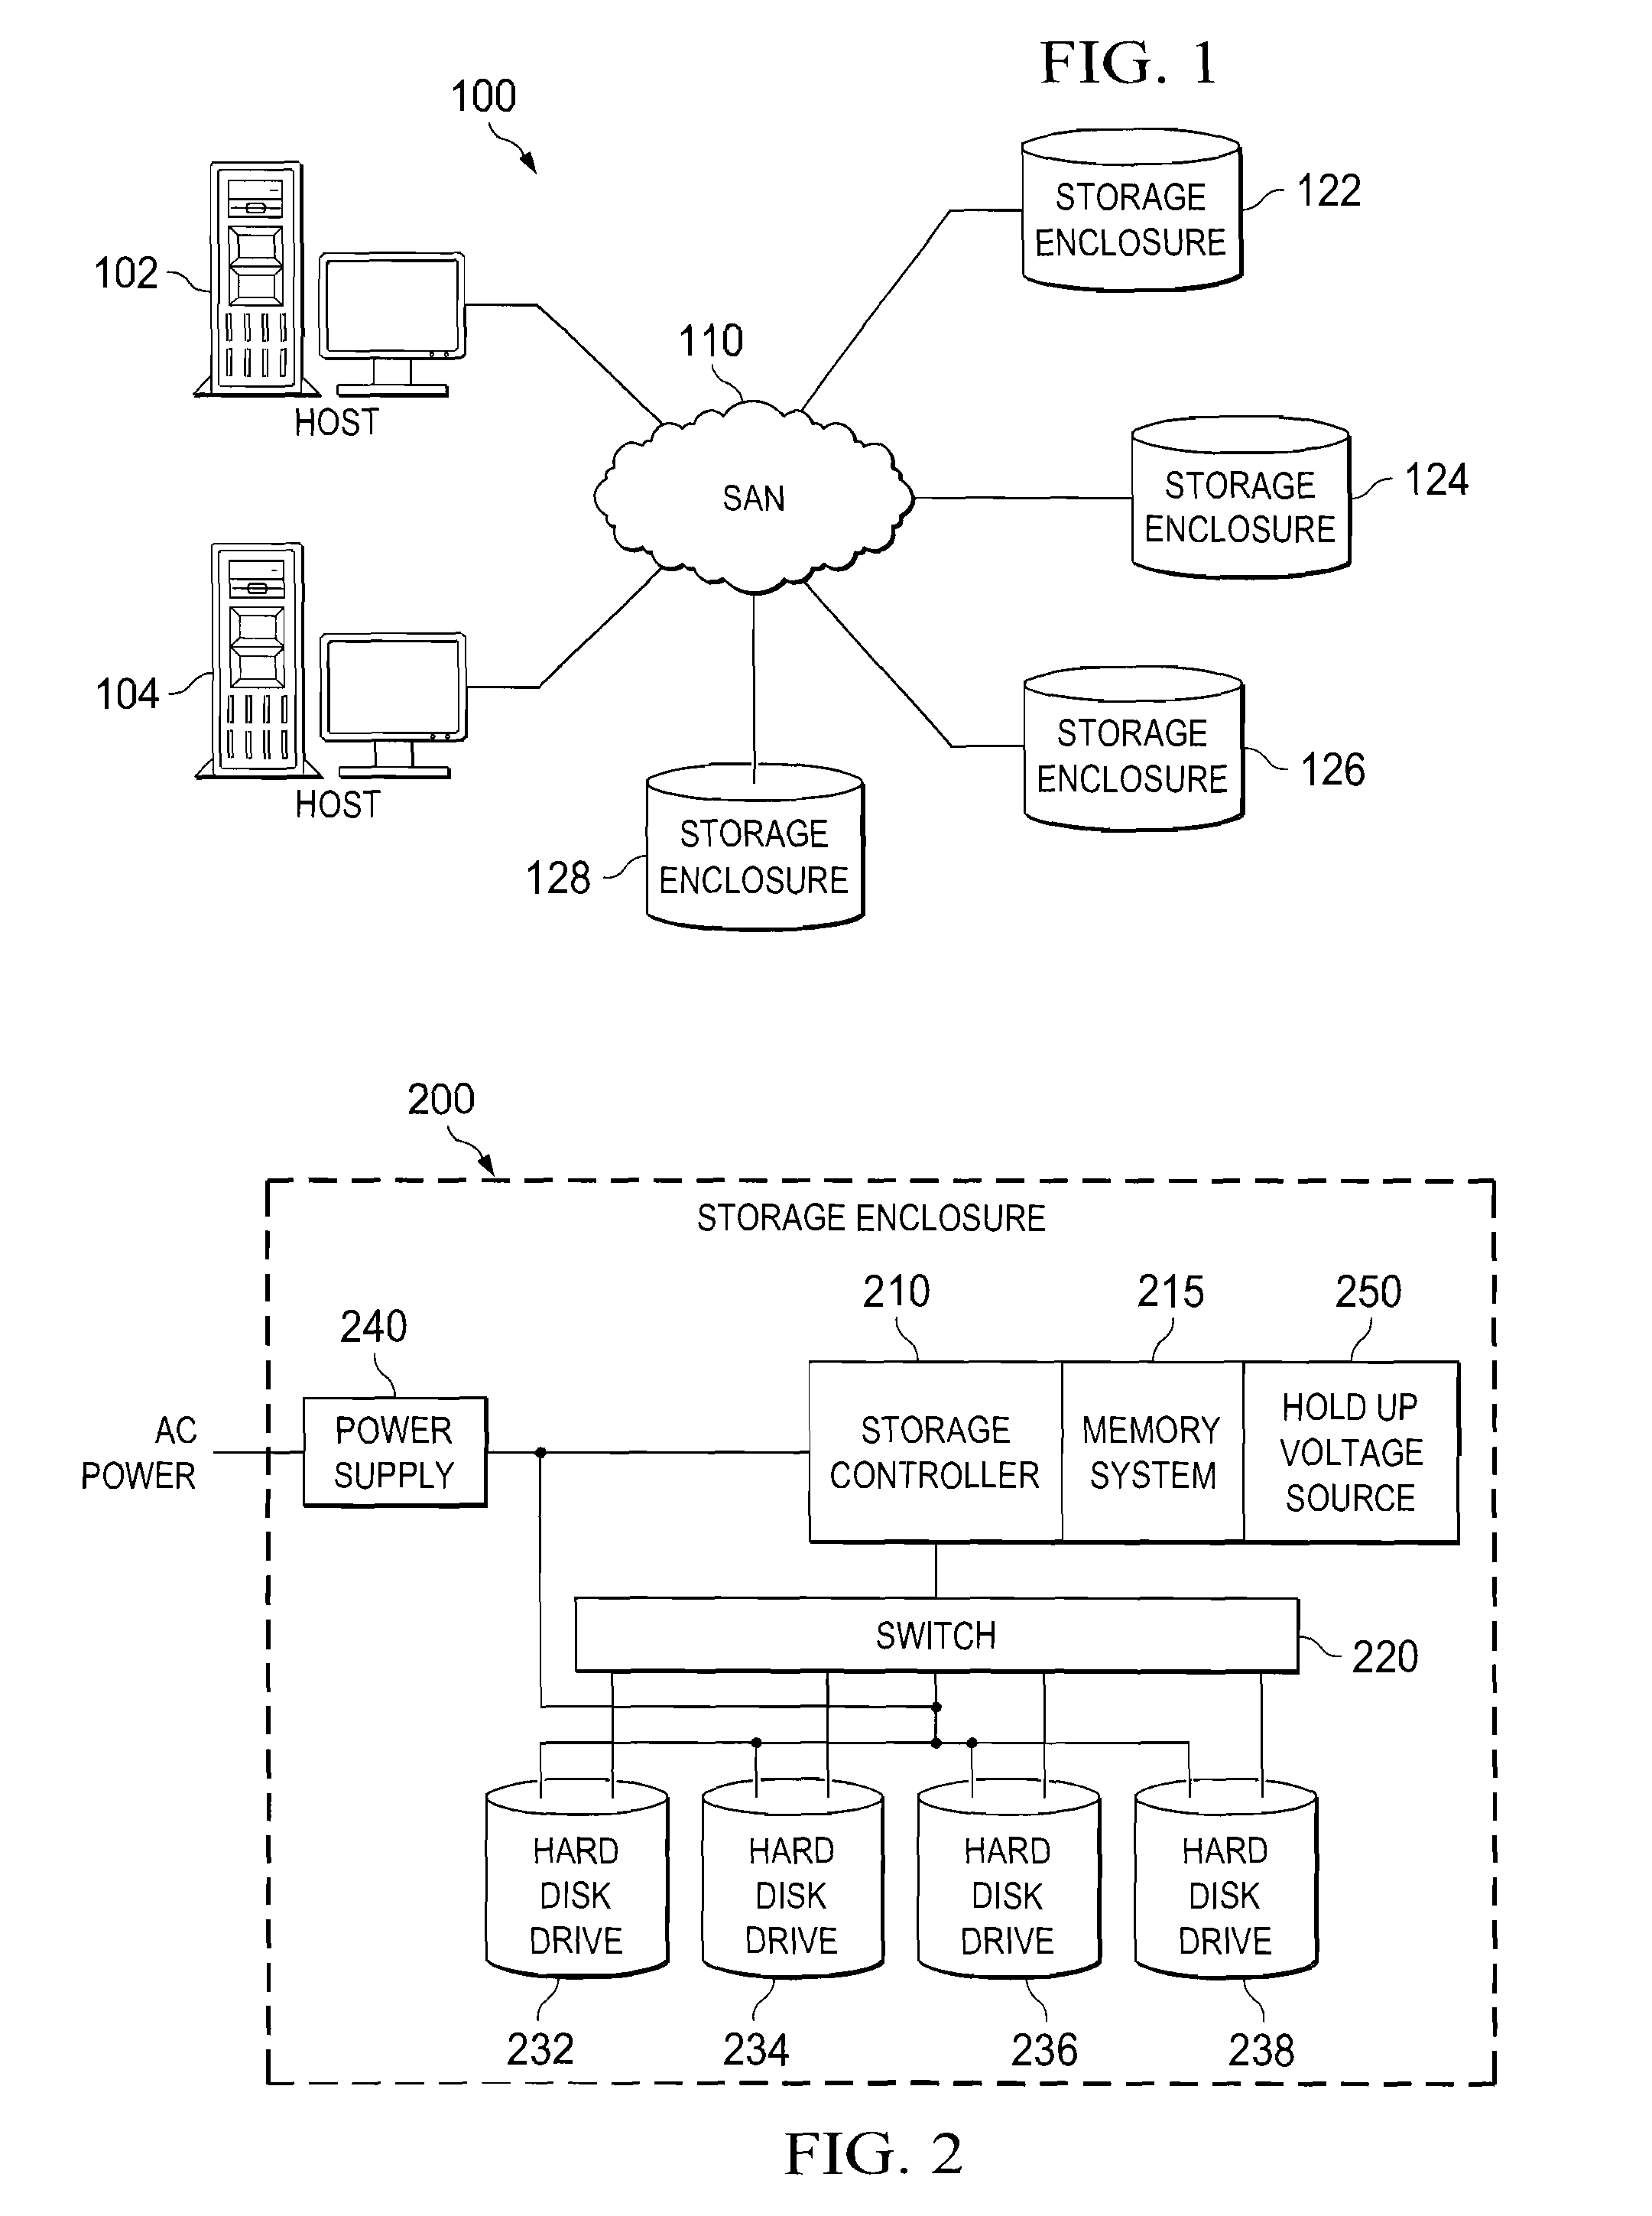 Verifying data integrity of a non-volatile memory system during data caching process